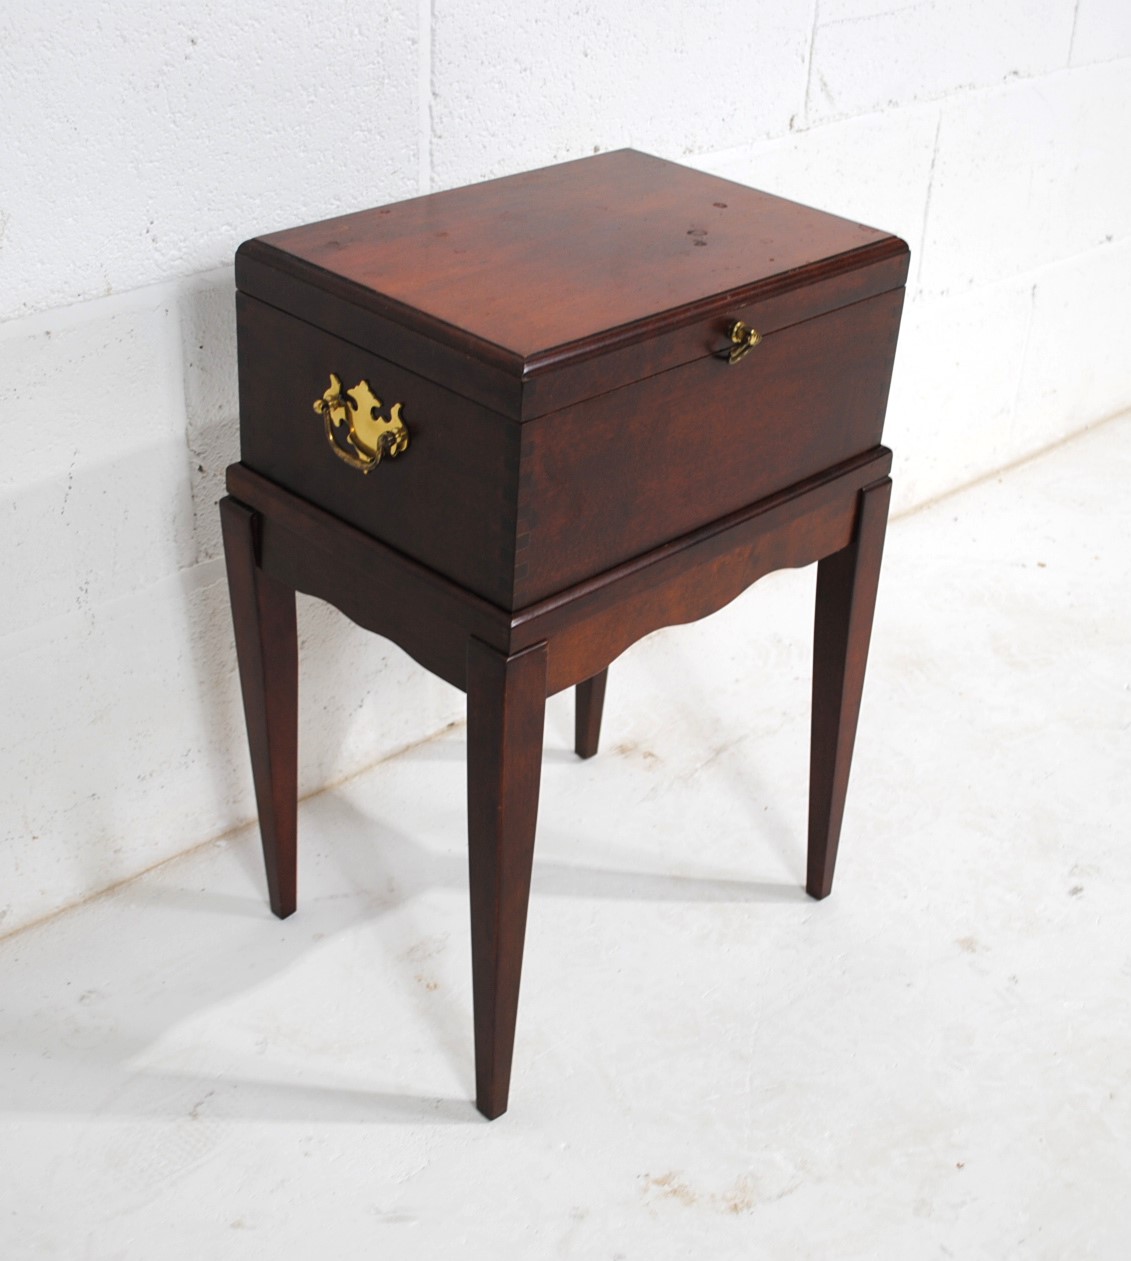 A small mahogany box on stand, with brass handles - height 54cm - Image 3 of 4